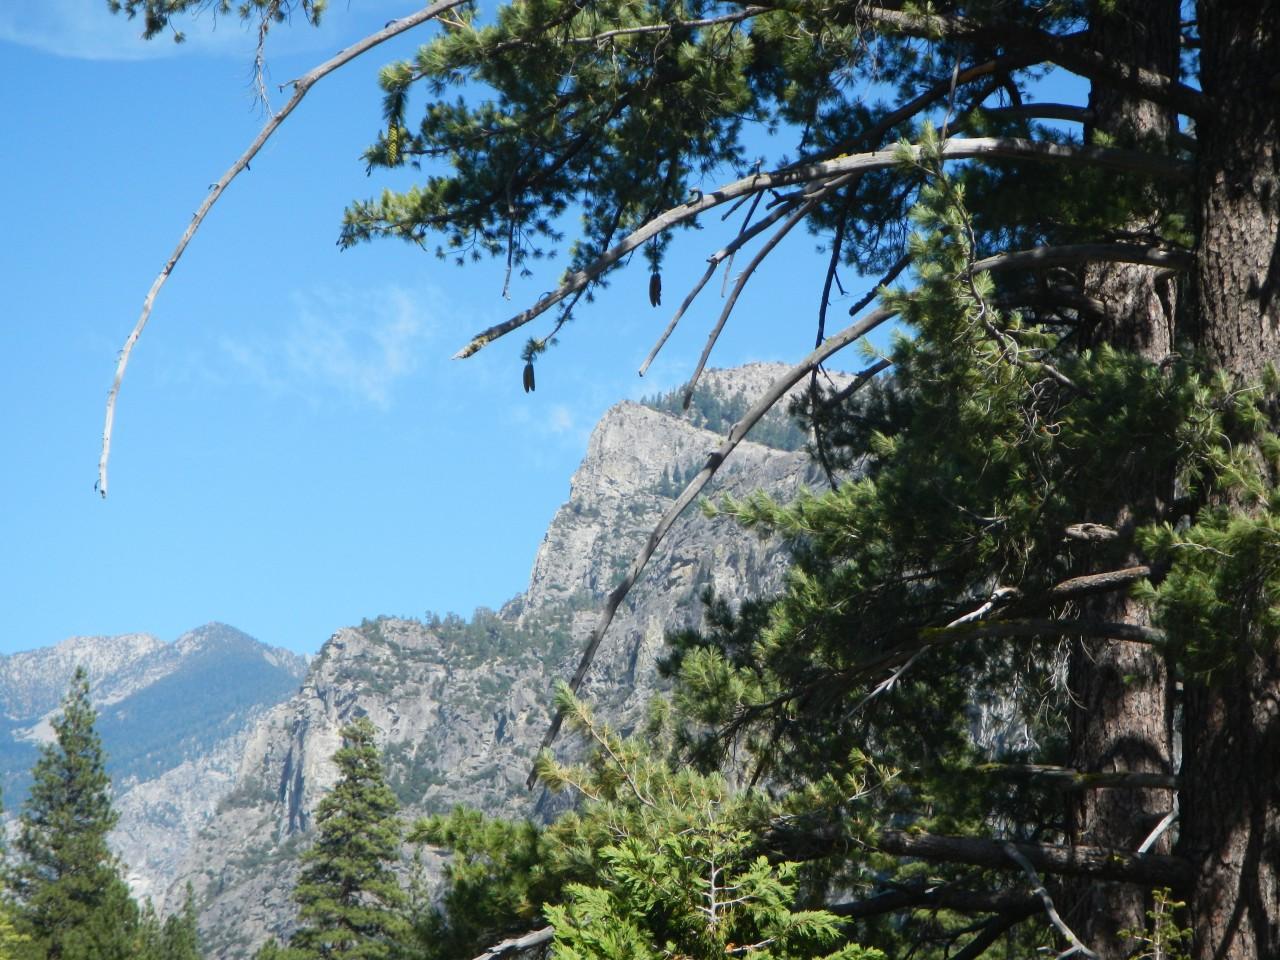 The view of Kings Canyon